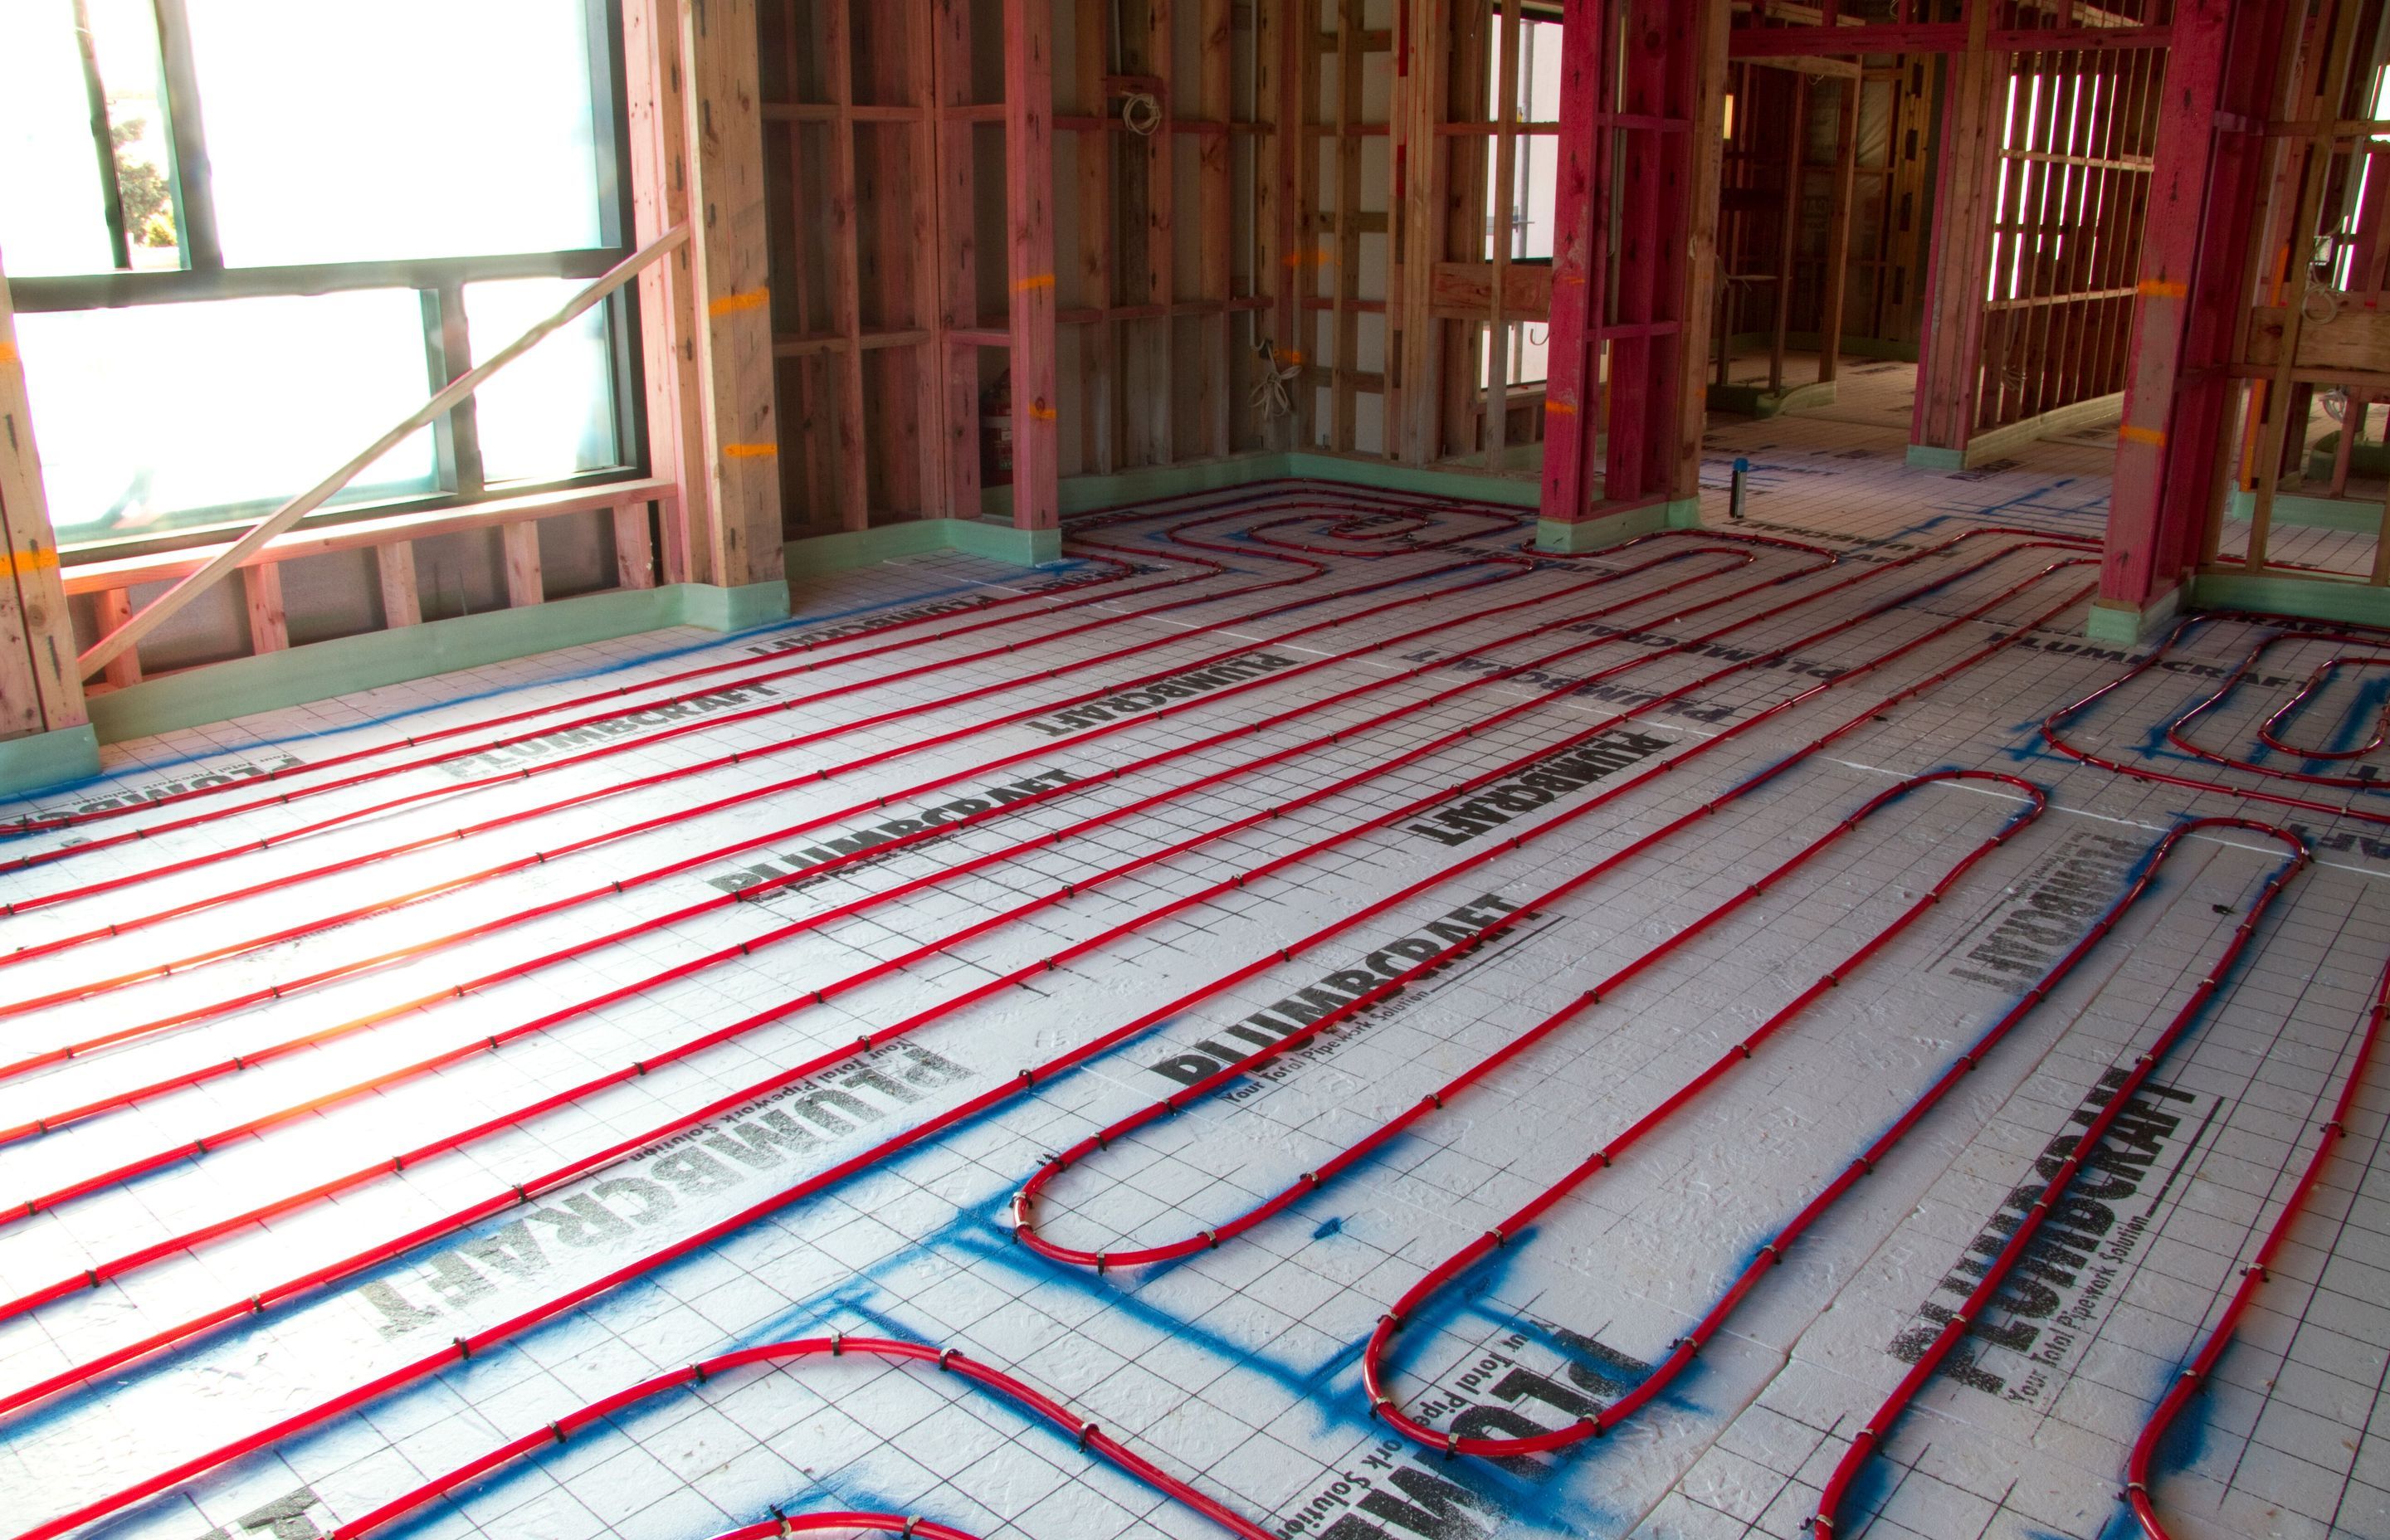 Instead of using radiators to heat a room, Underfloor Heating uses hot water pipes that warm the slab or floor, heating the room from the ground up.